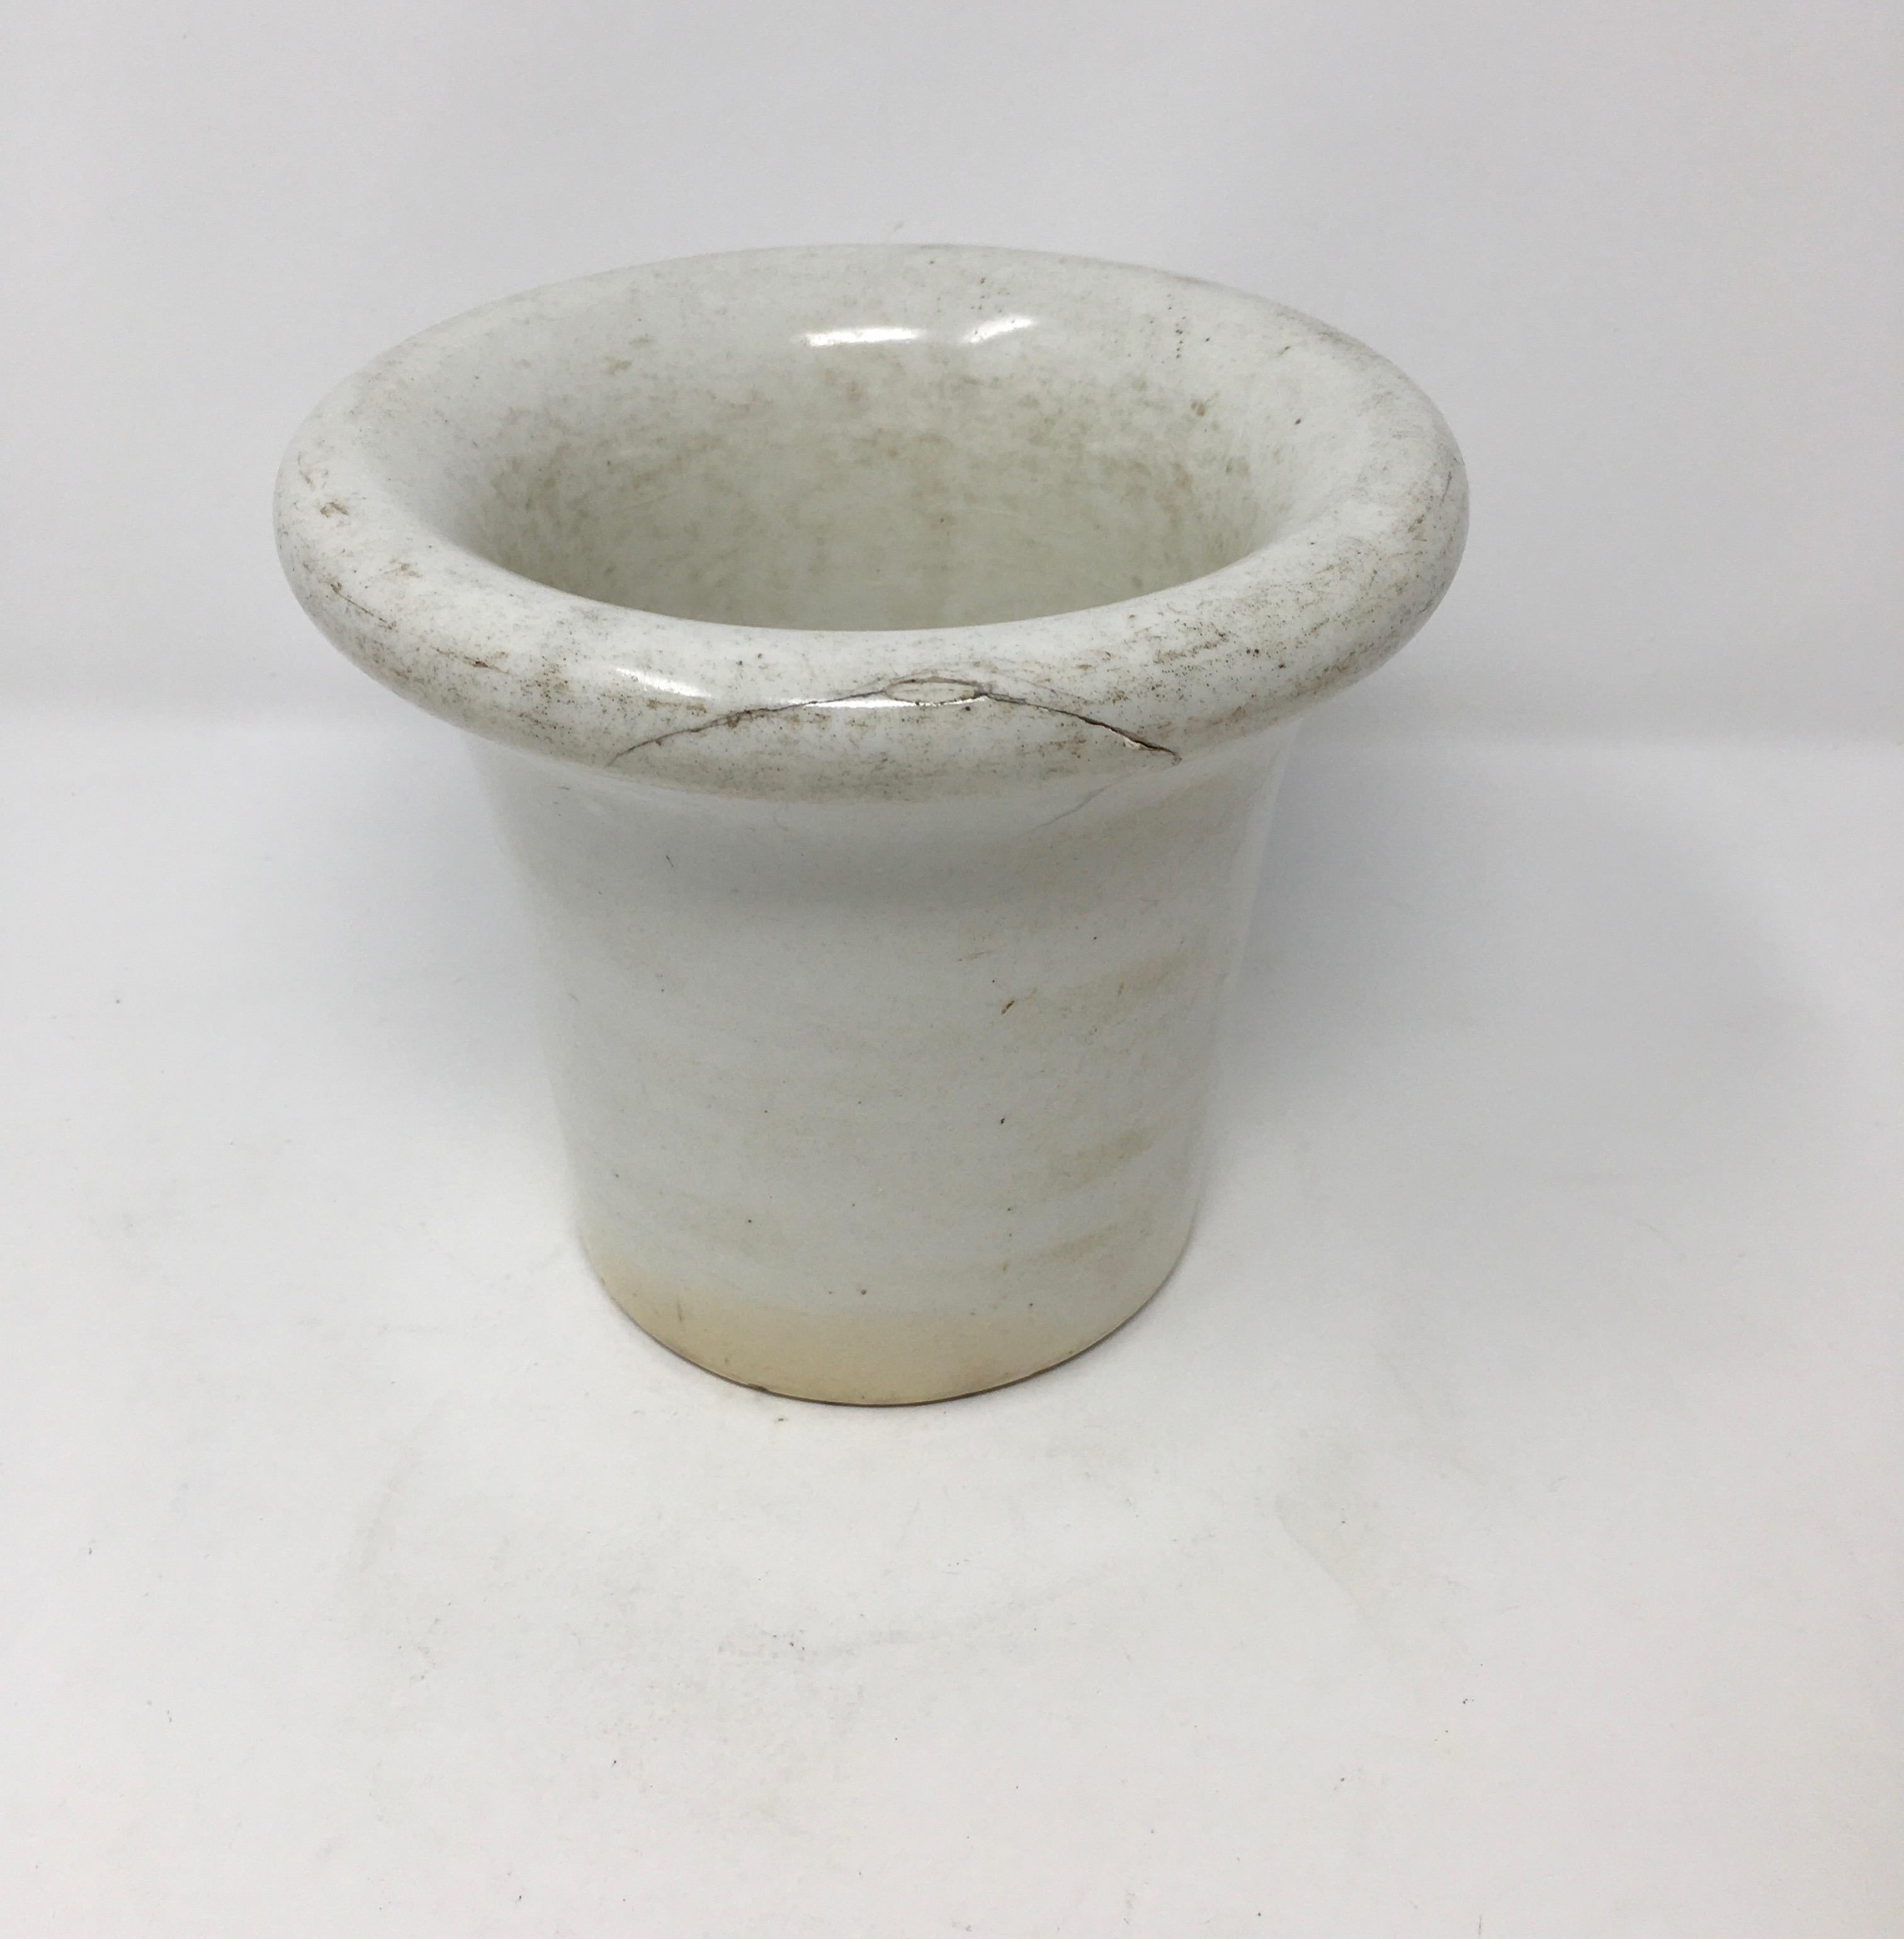 French Porcelain Mortar and Pestle from France